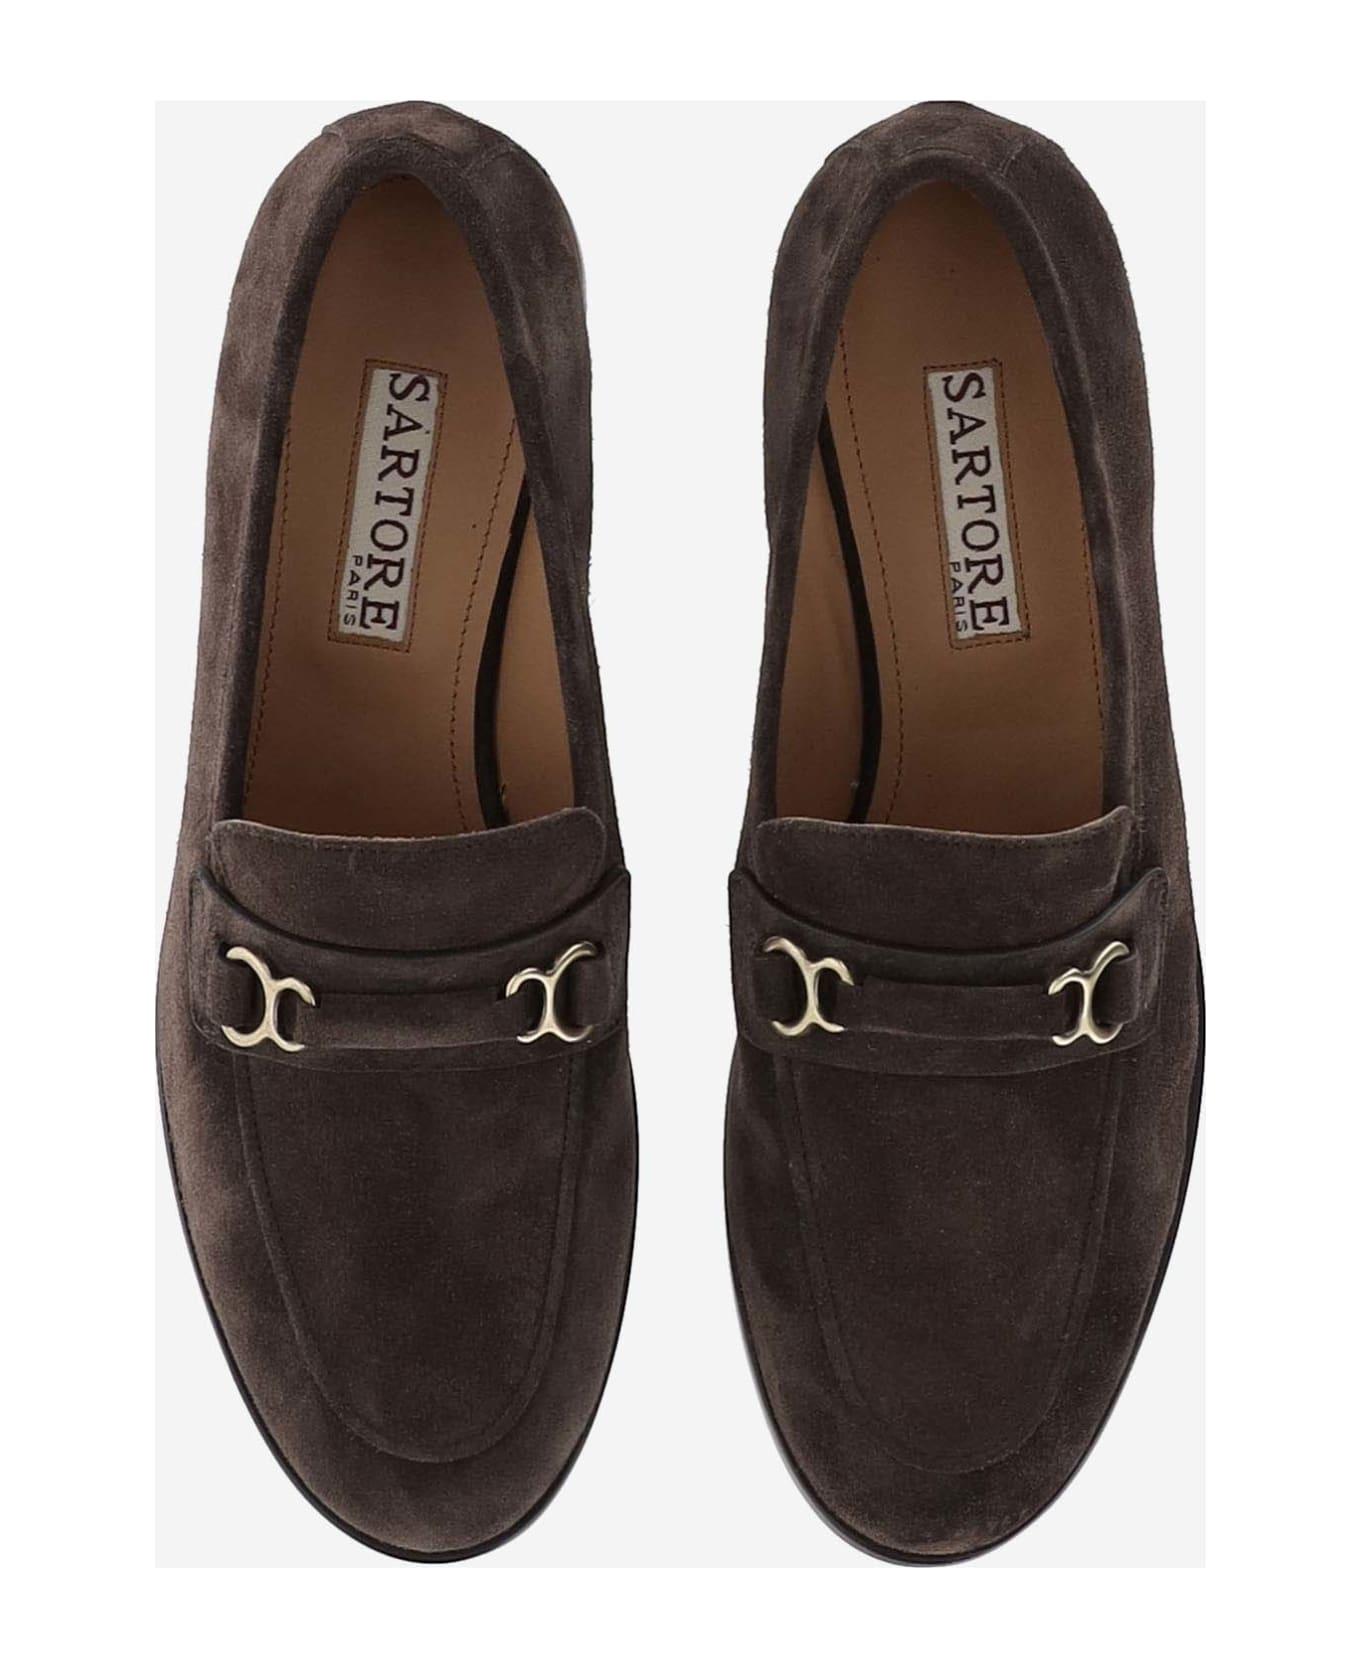 Sartore Suede Loafers - Brown